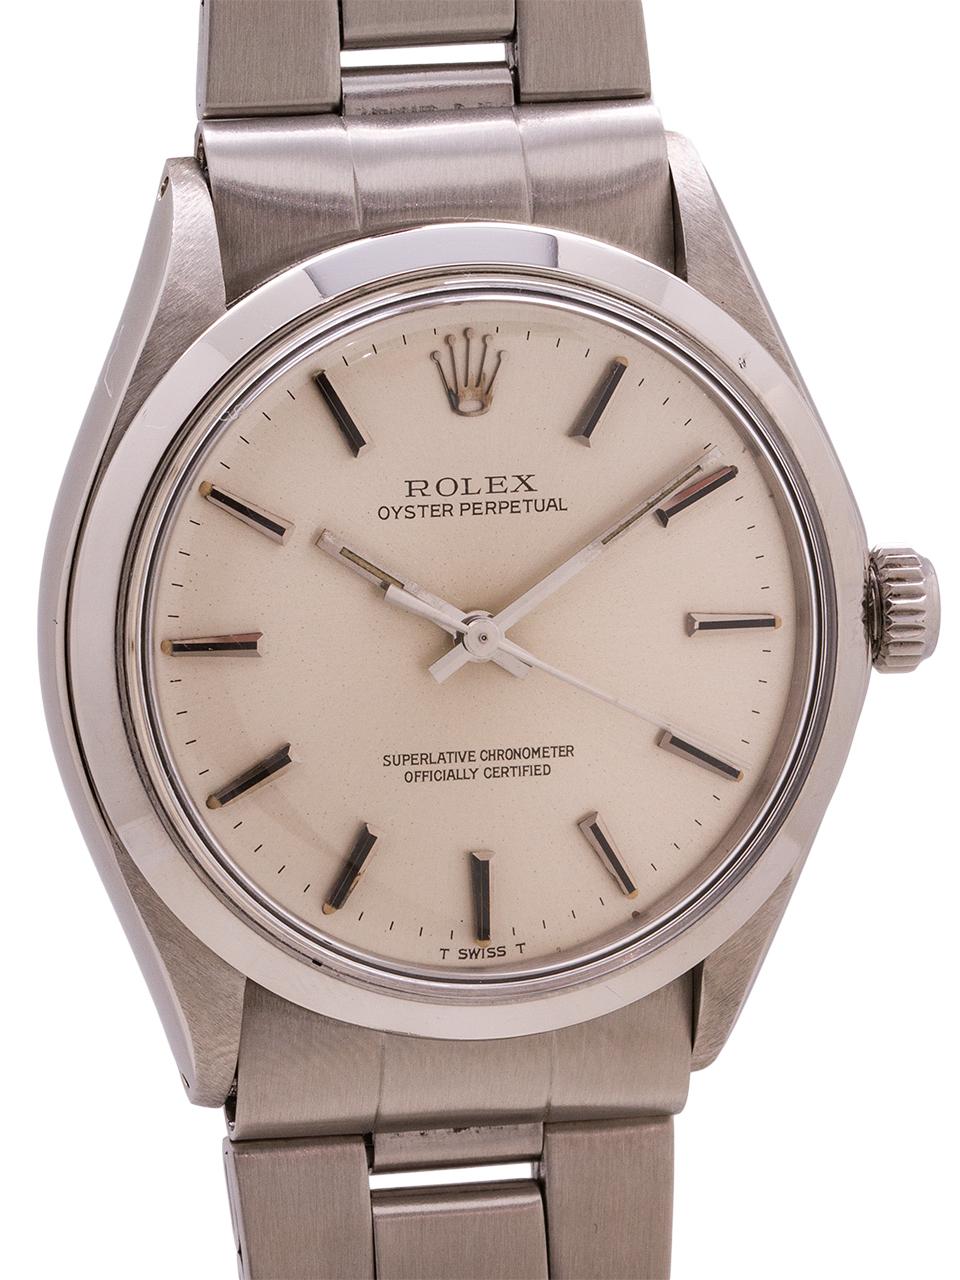 
Vintage Rolex Oyster Perpetual ref 1002 circa 1971. Featuring 34mm diameter case with smooth bezel, acrylic crystal, and original silver satin dial with applied silver indexes and silver baton hands. Powered by caliber 1570 chronometer rated self